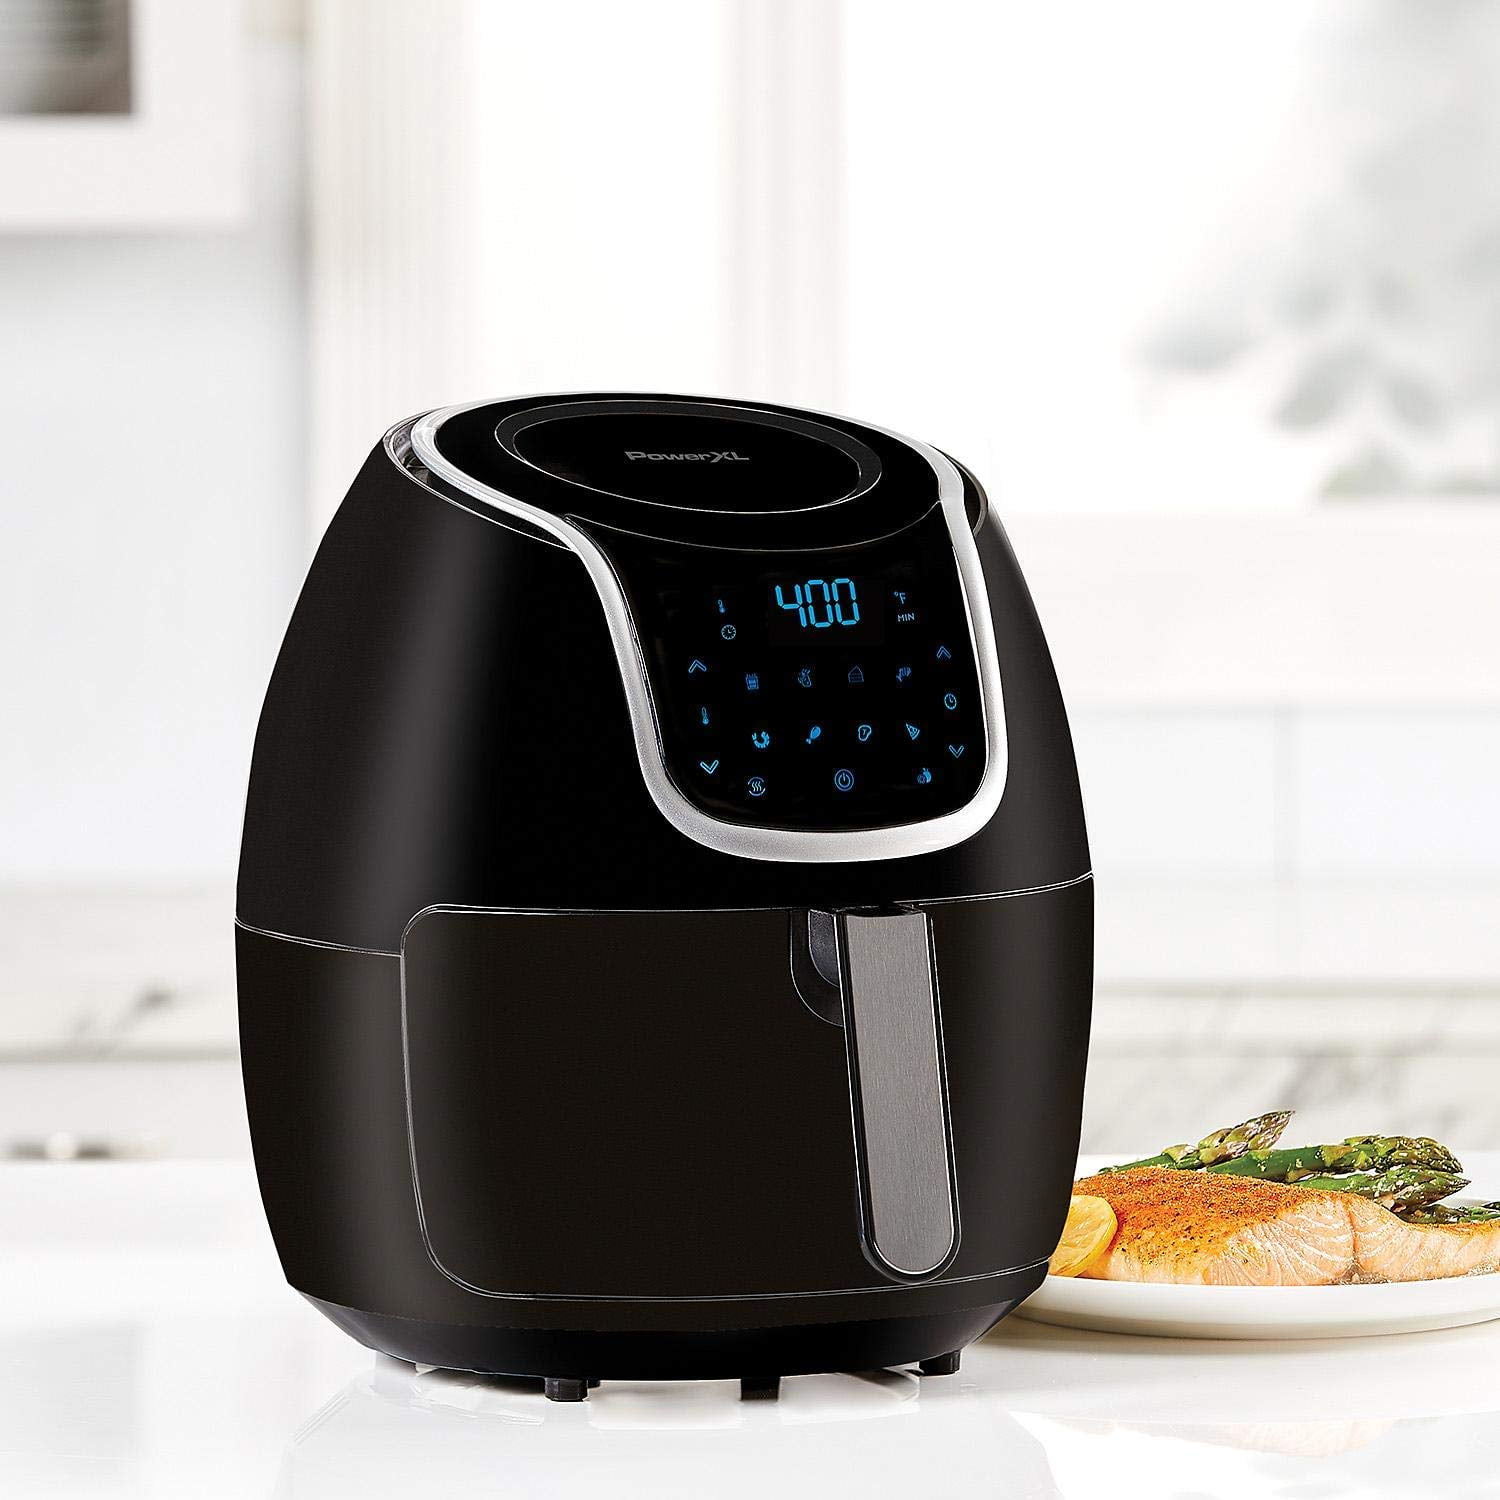 Yedi Total Package Air Fryer Oven XL, 12.7 Quart